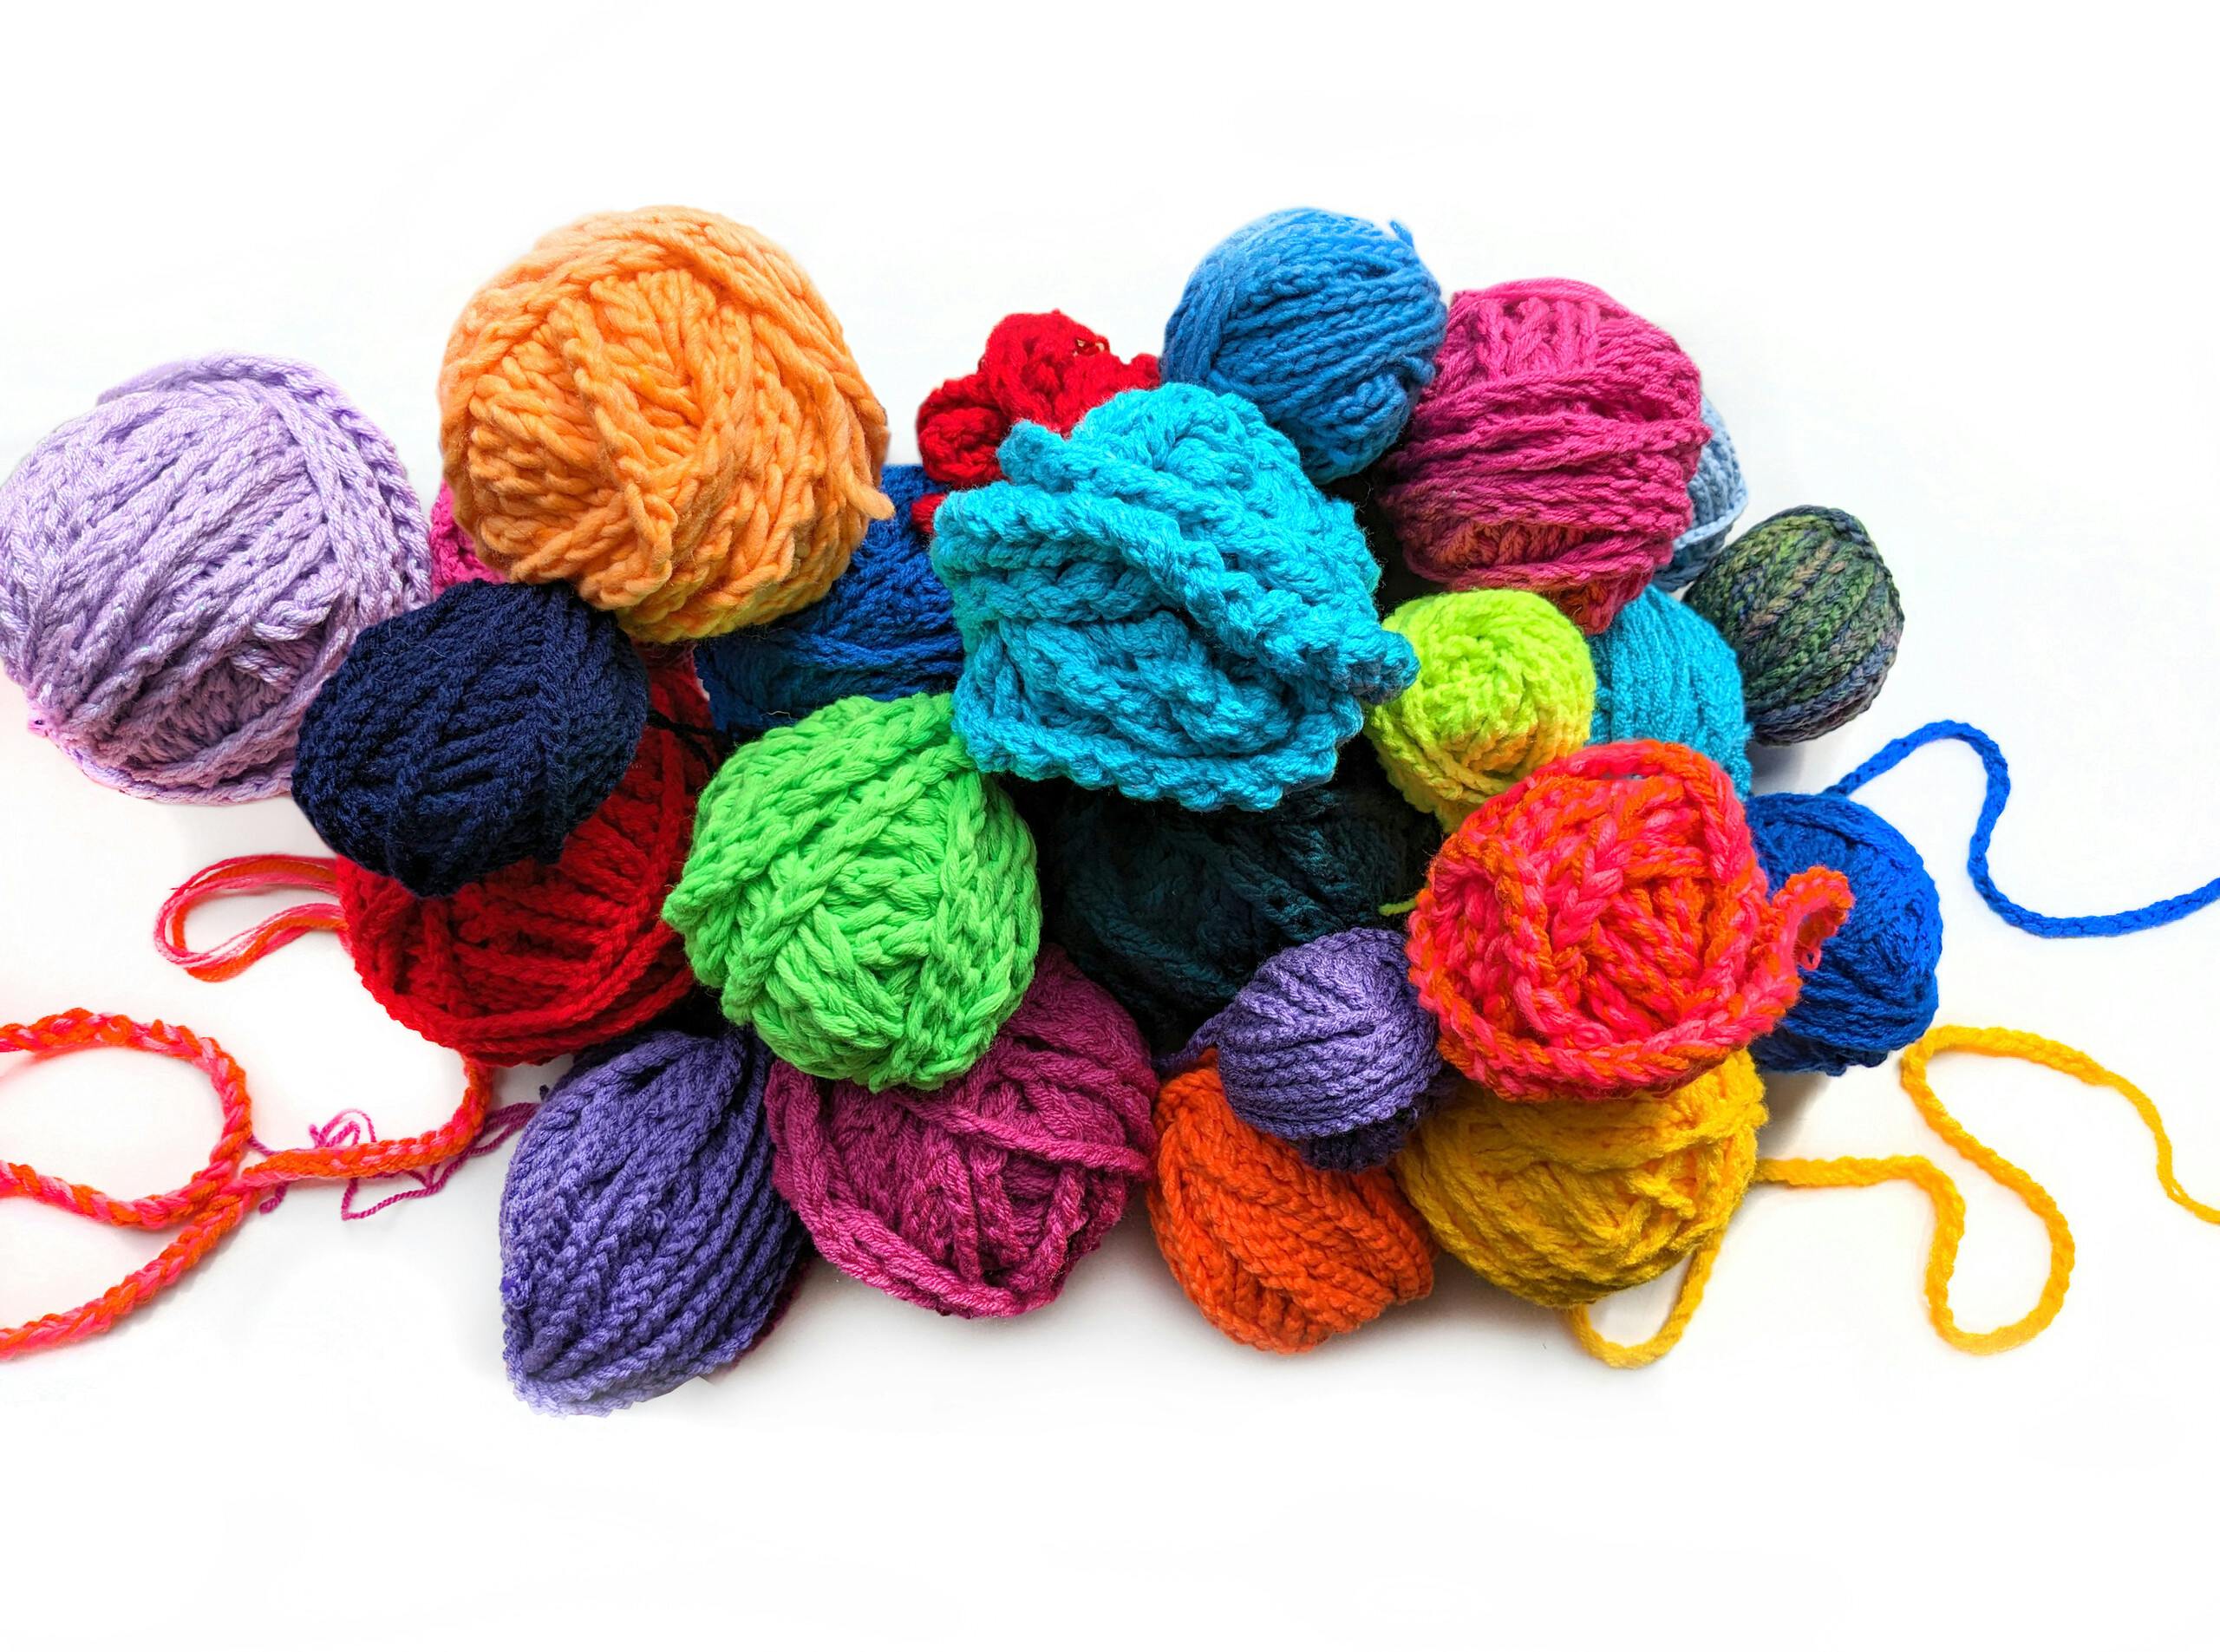 Photo: many colorful balls of wool are lying together in a pile, air stitches are wrapped around some of the balls